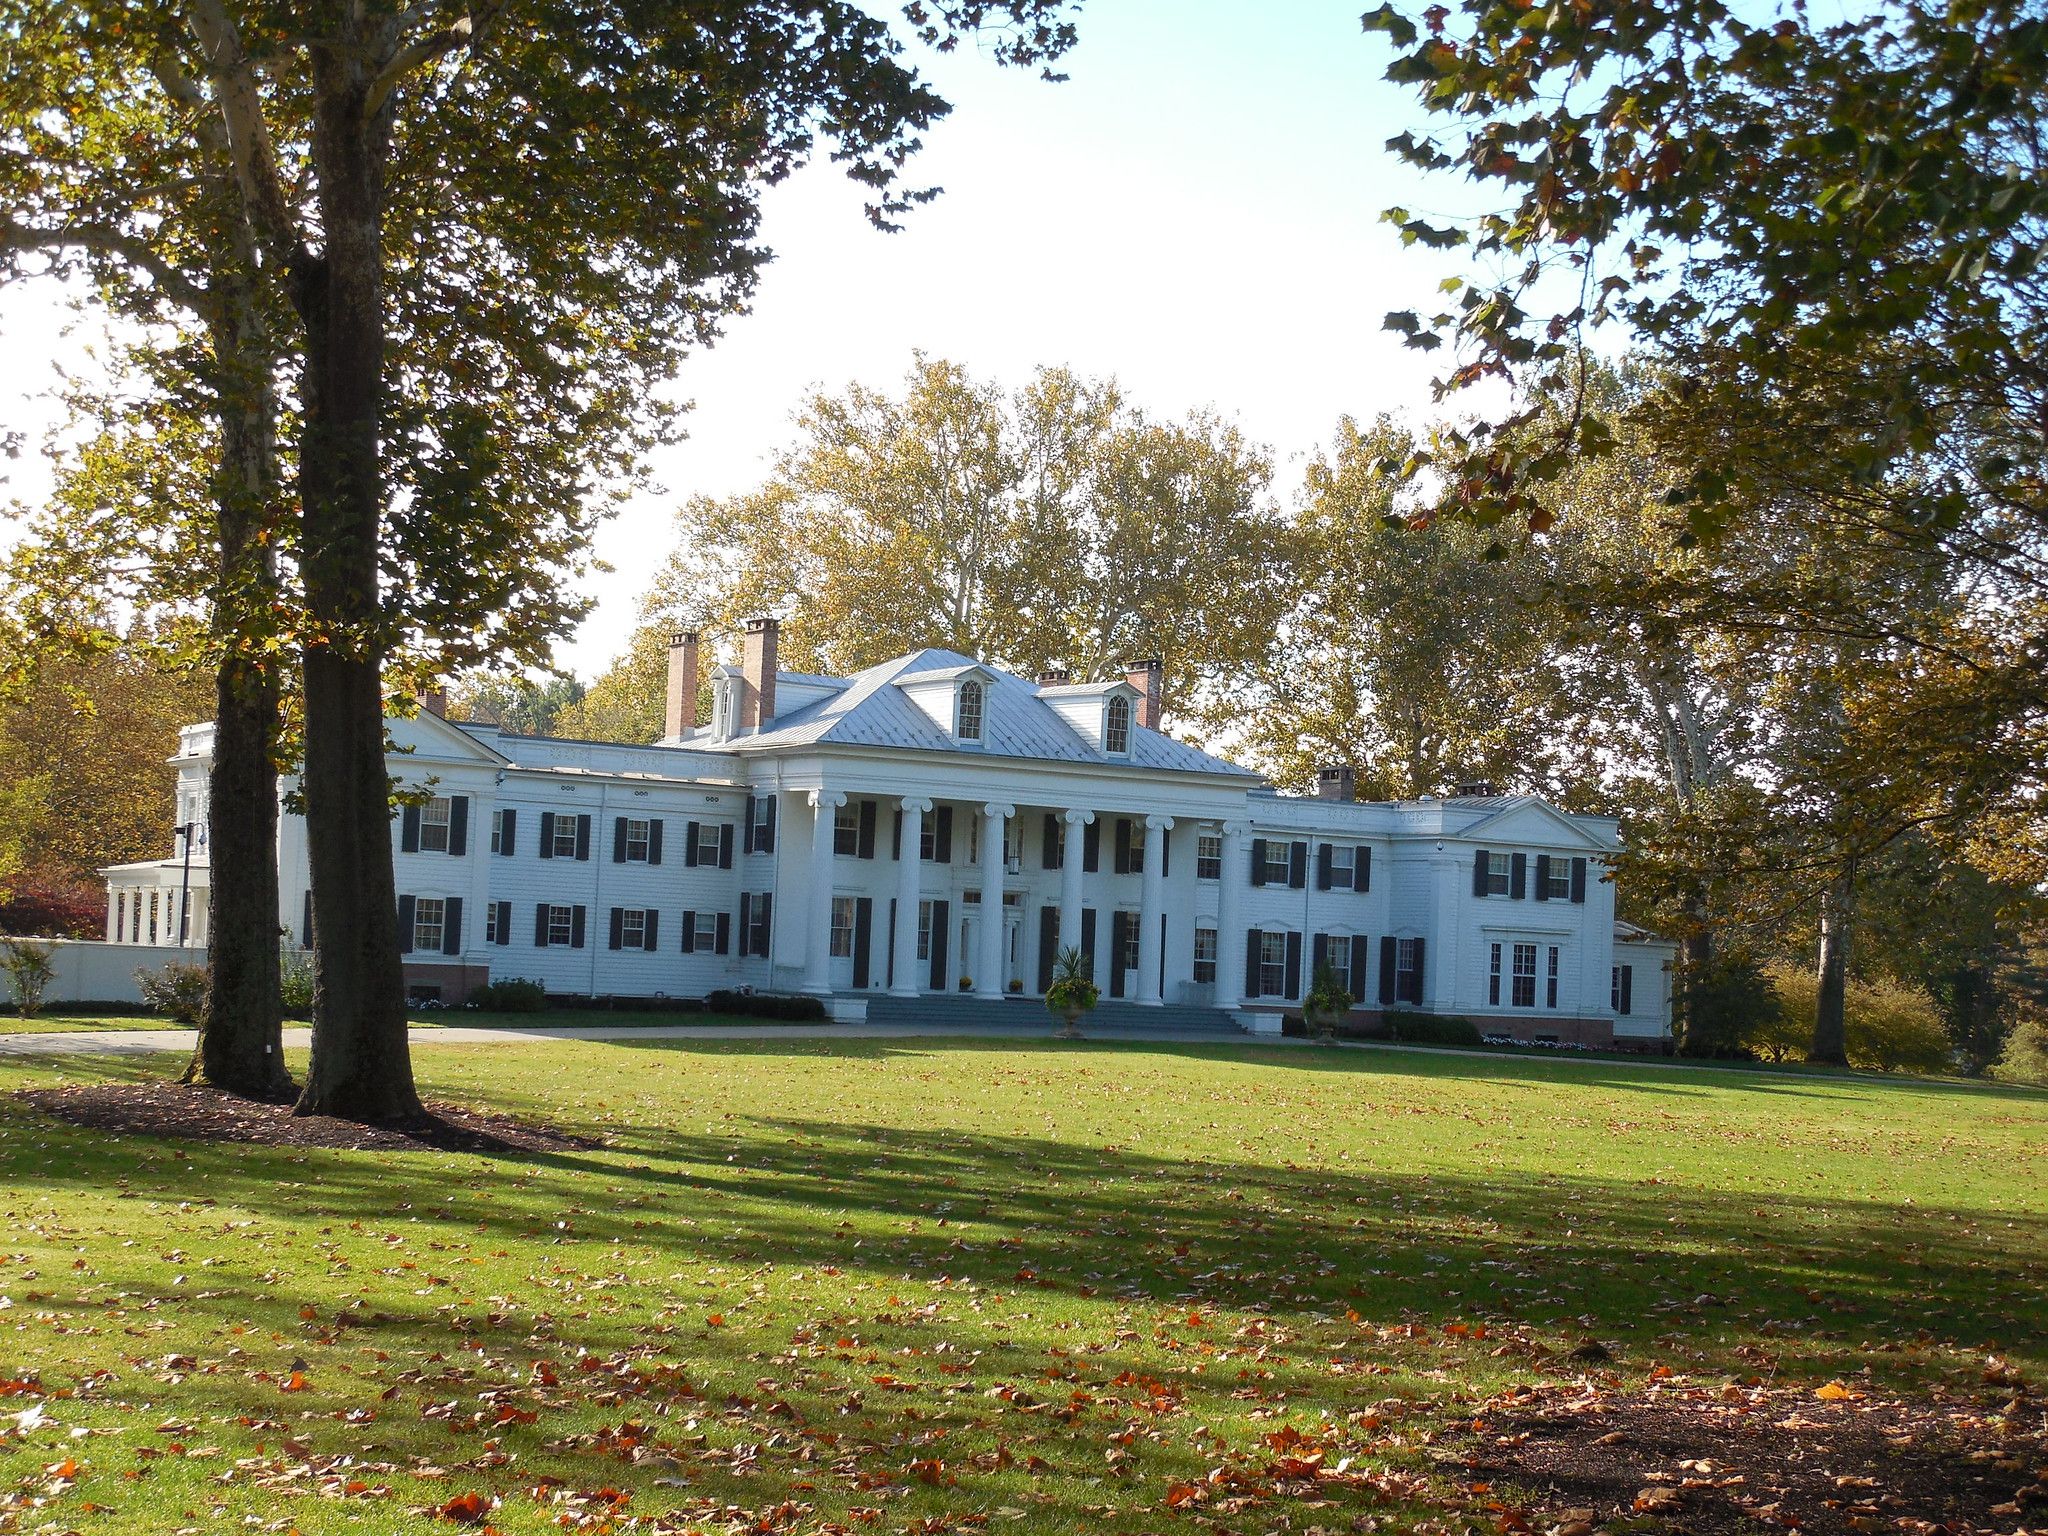 A view of the Drumthwacket Mansion